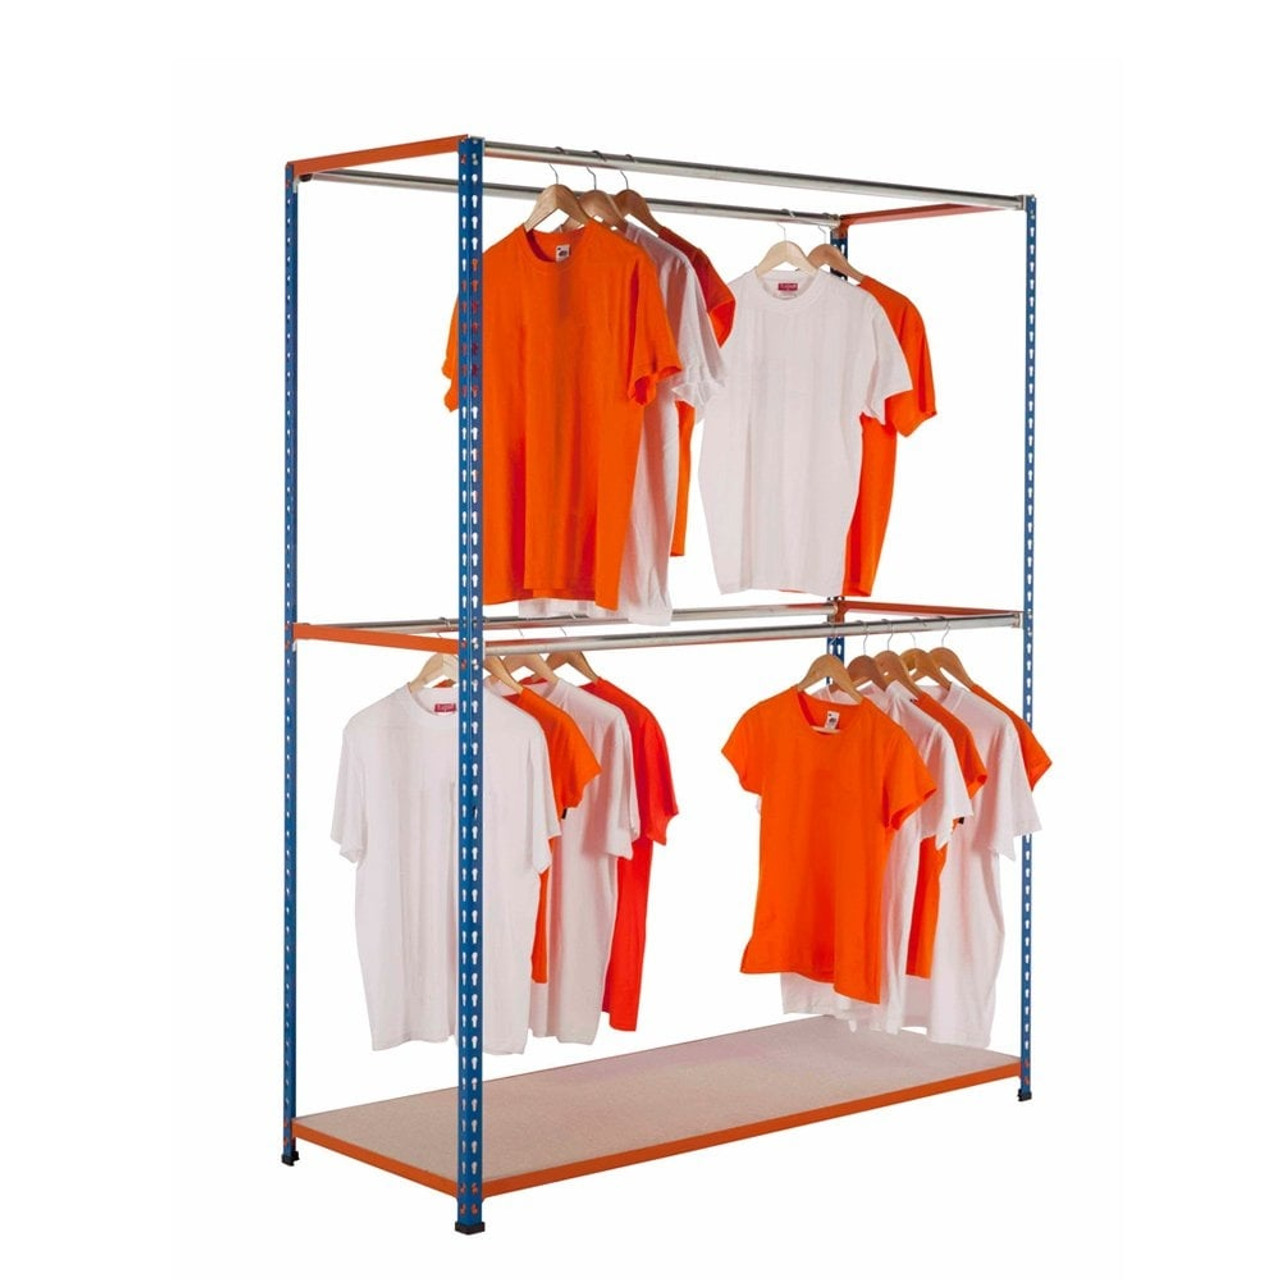 Stockroom Garment Racking Units - Up To 160kg UDL/Tier - Choice of ...